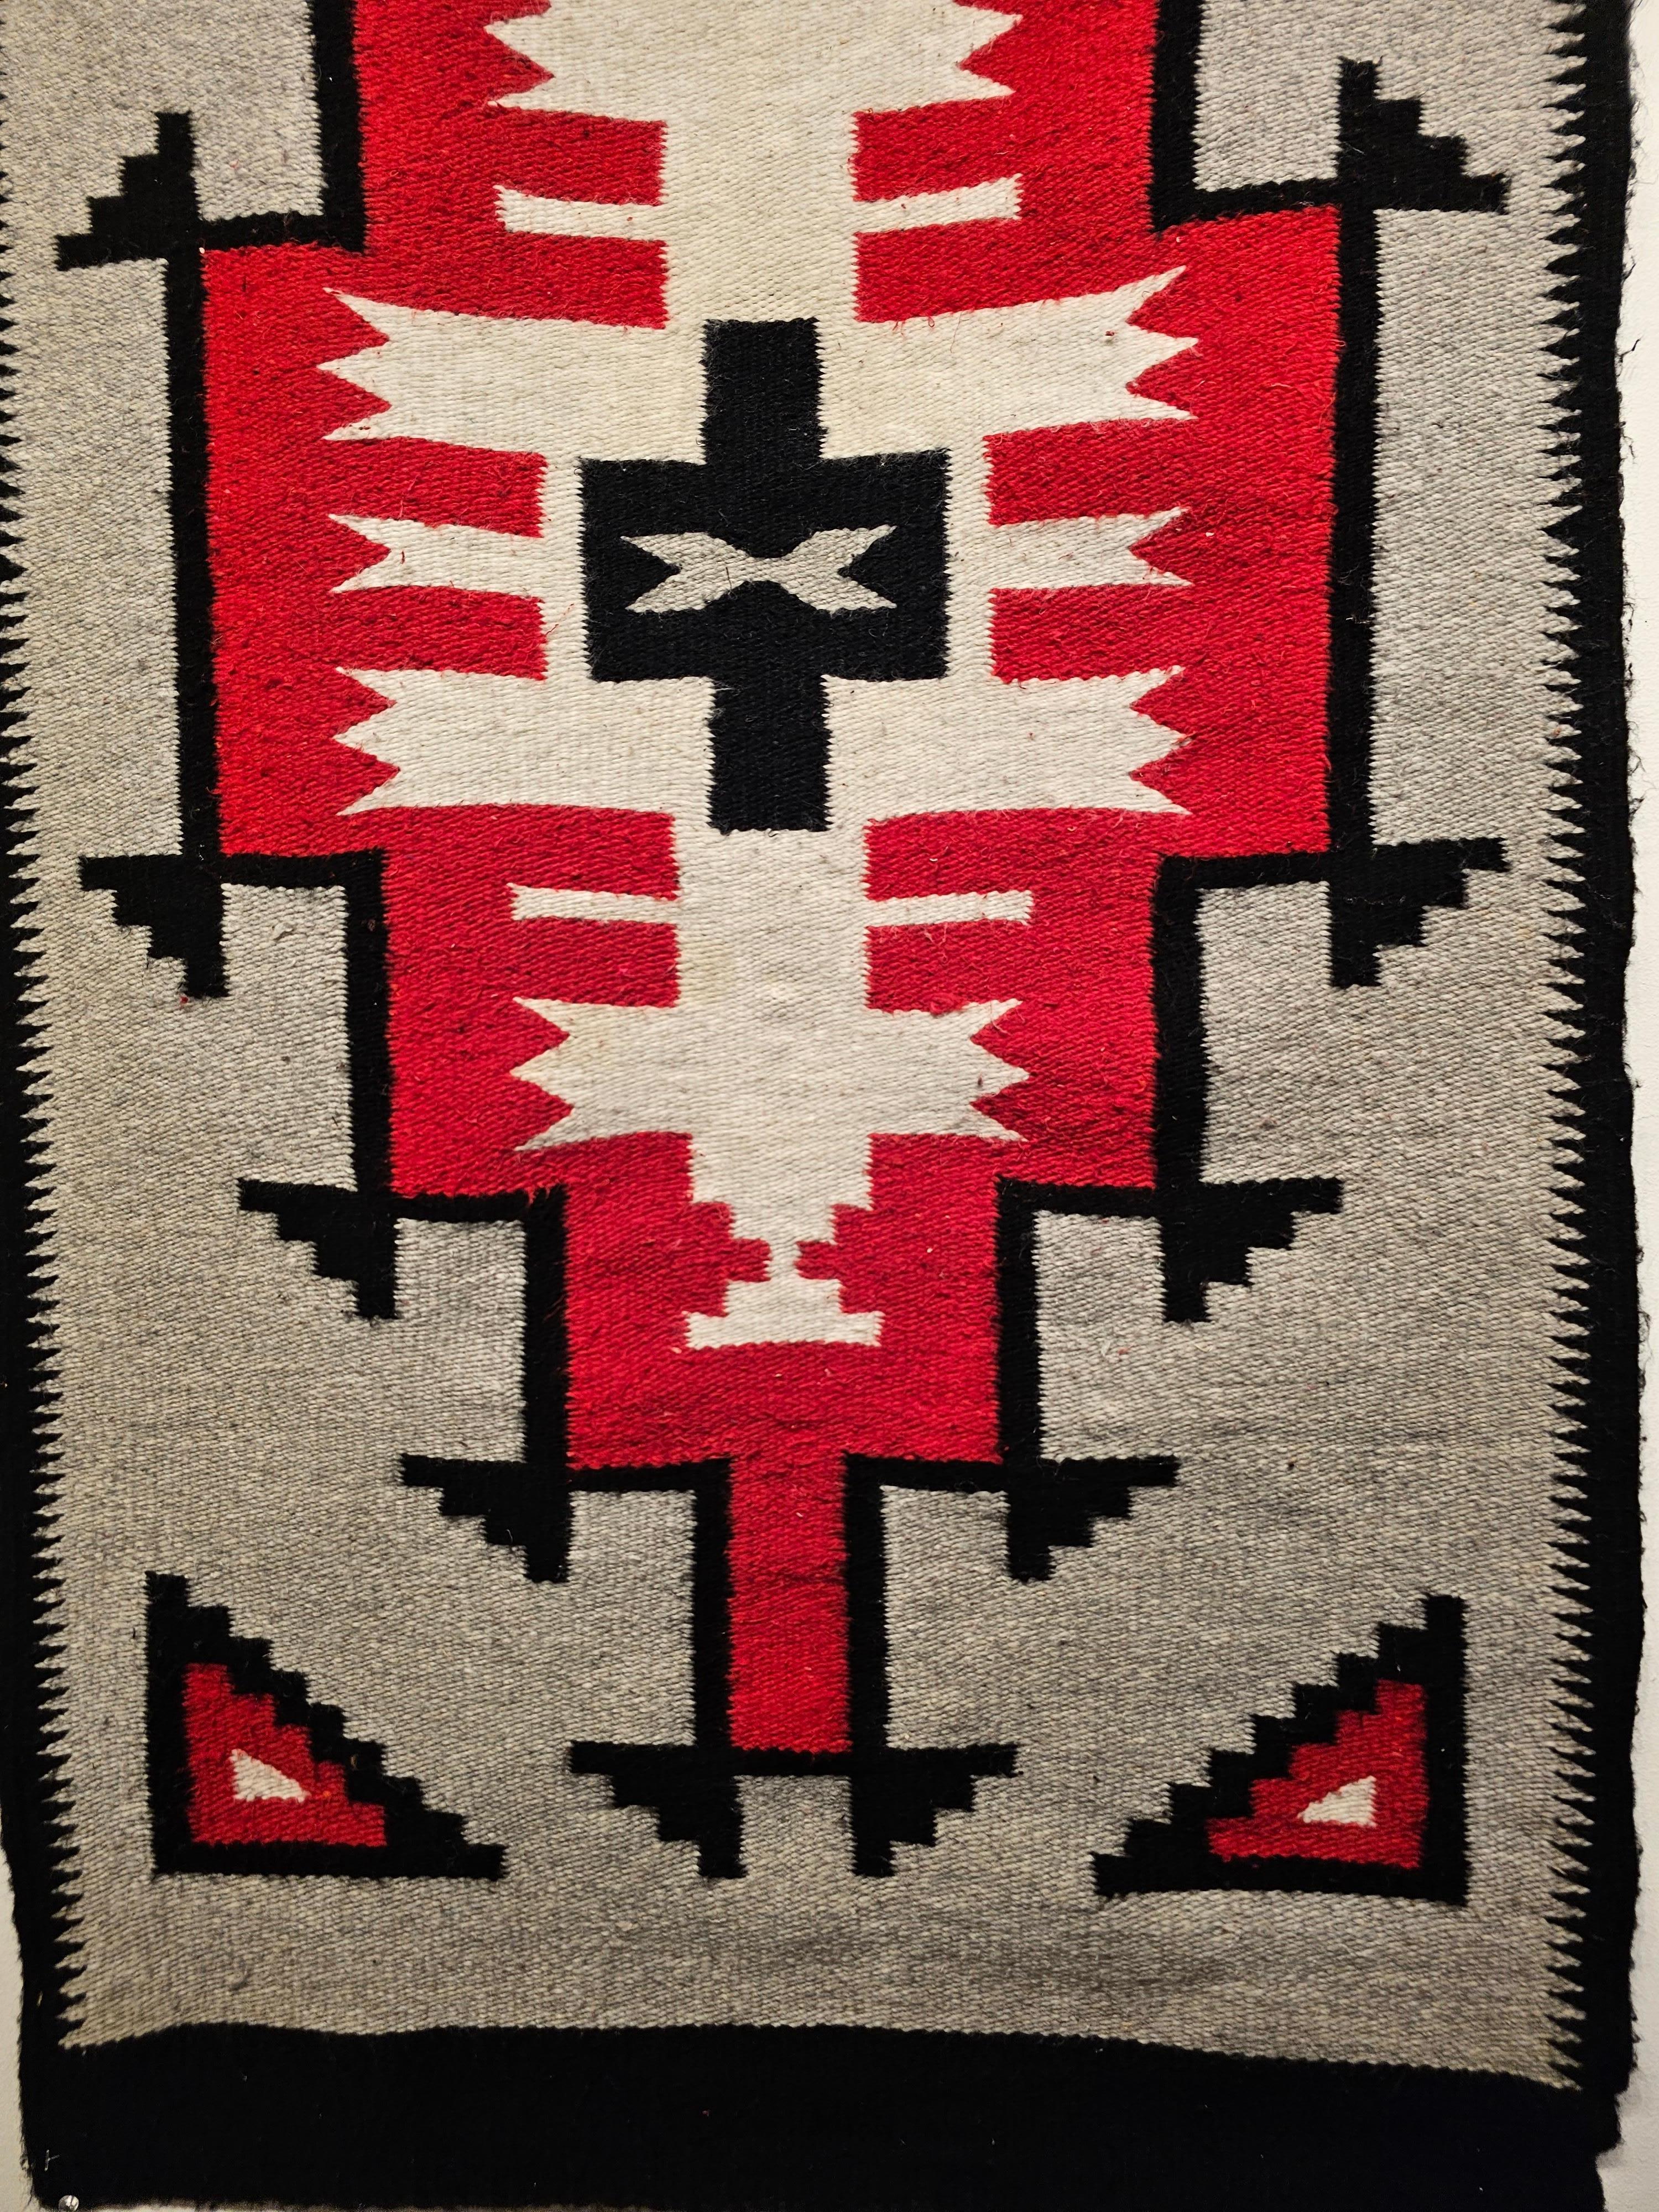 Vintage native American Navajo rug from the mid 1900s. This Navajo rug has a medallion design in red and white with a black border that covers most of the field which is in gray color. Navajo weavers use mostly natural organic dyes that are